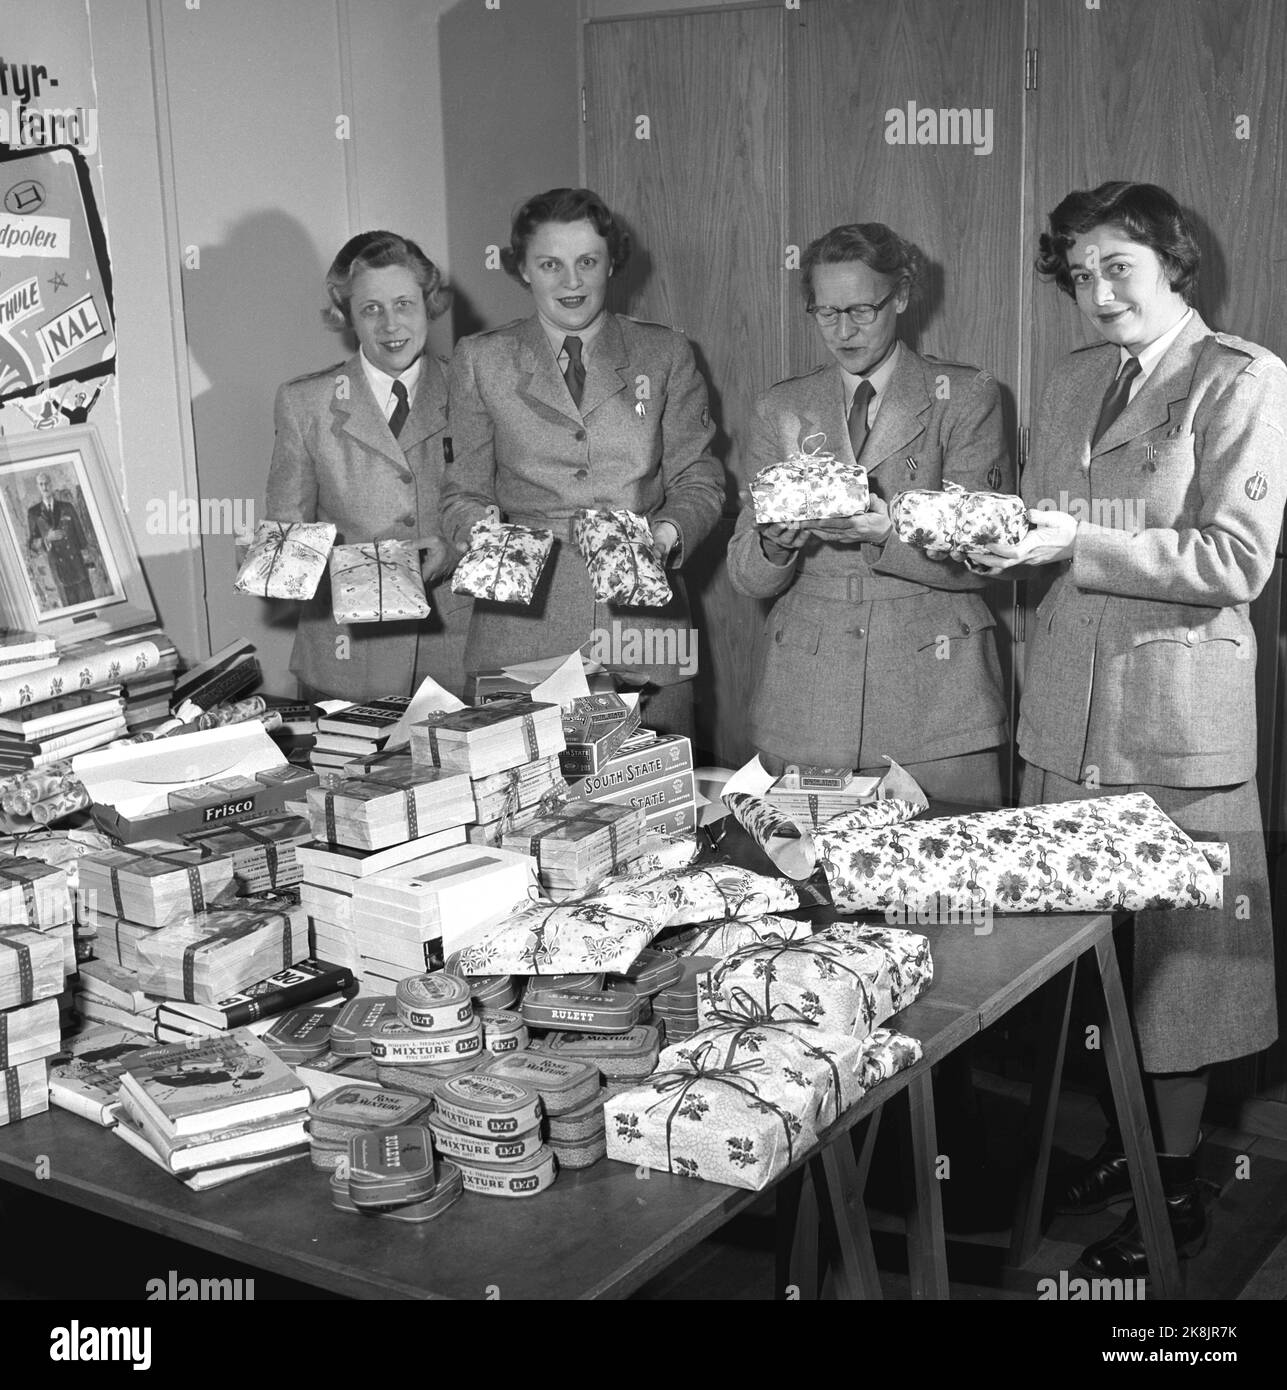 Oslo November 1956. Norwegian police troops travel to Egypt to participate in the International Police Church in Suez. 50 Norwegian soldiers have been traveled to Naples, where 5,000 UN soldiers from the Nordic countries, Canada, India and Pakistan were gathered. Here, Lotter packs Christmas presents for the soldiers, which consists of cigarettes, tobacco and books for the UN boys in Suez. Ntb archive / ntb Stock Photo